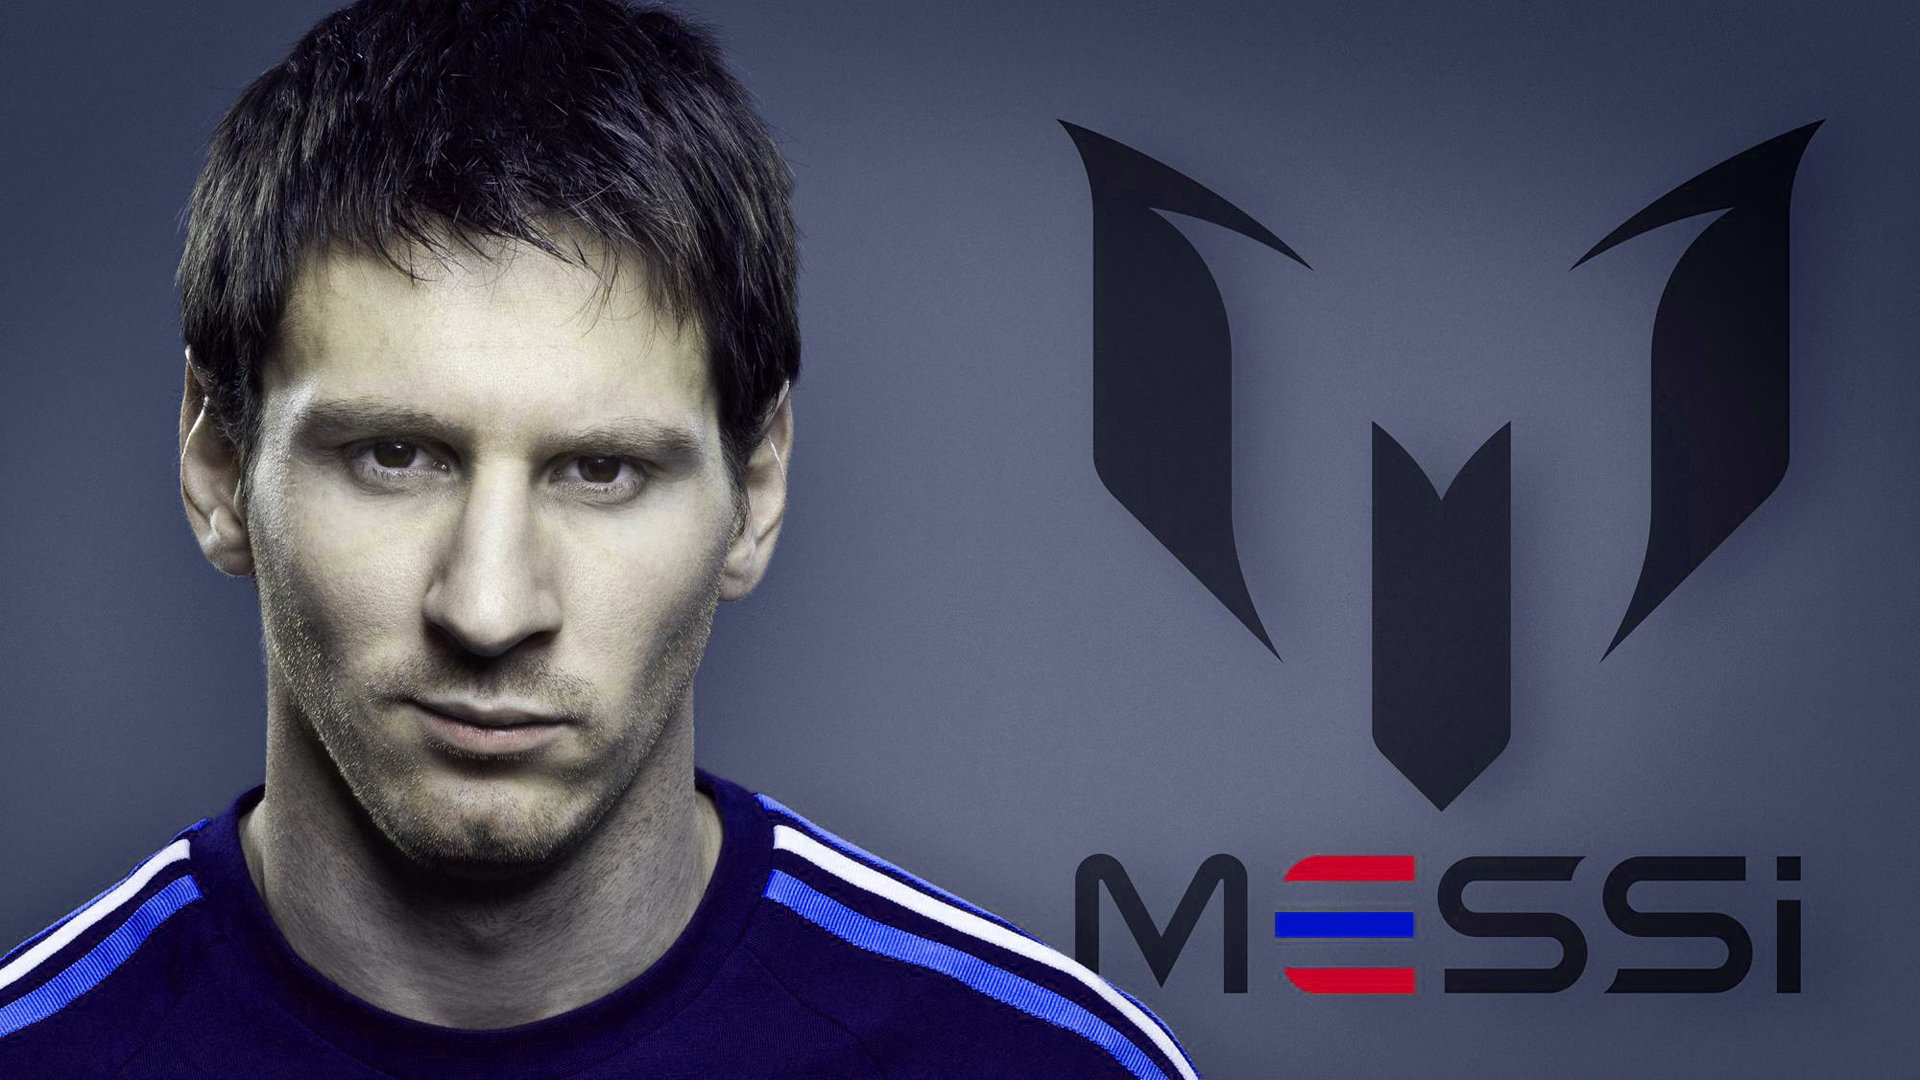 Lionel Messi Wallpapers Pictures Images 1920x1080